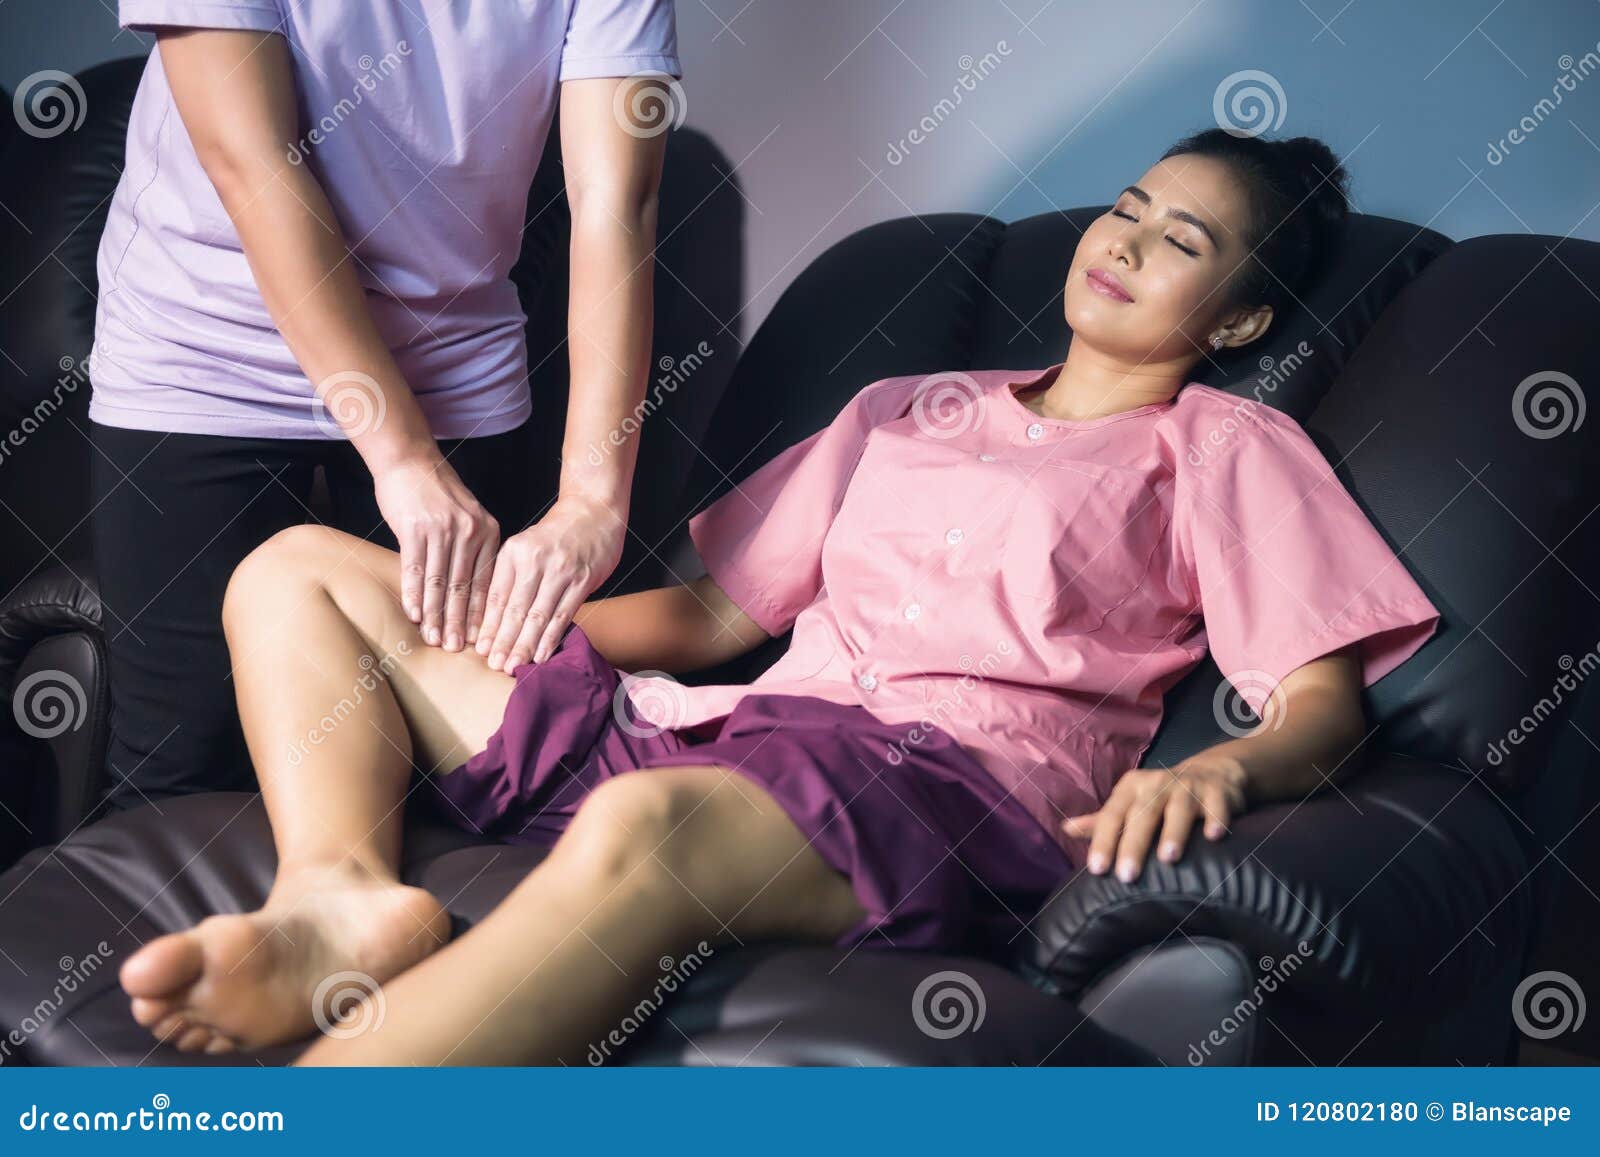 Calf And Leg Thai Massage In Spa Stock Photo Image Of Hands Foot